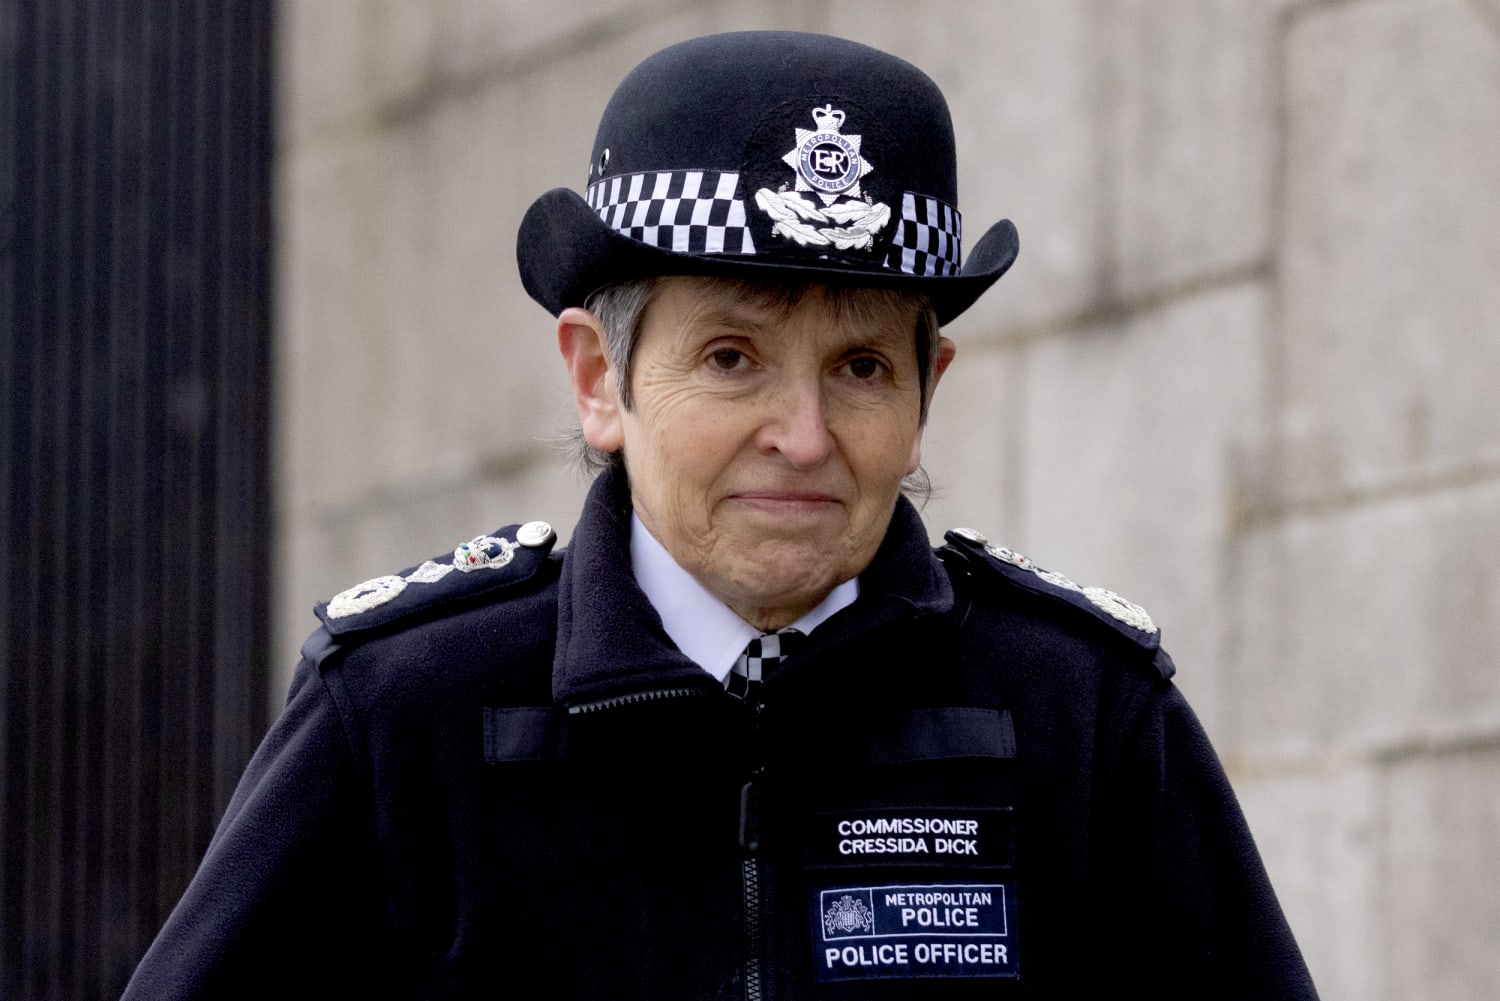 Cressida Dick Will Be First Woman to Lead Scotland Yard - The New York Times